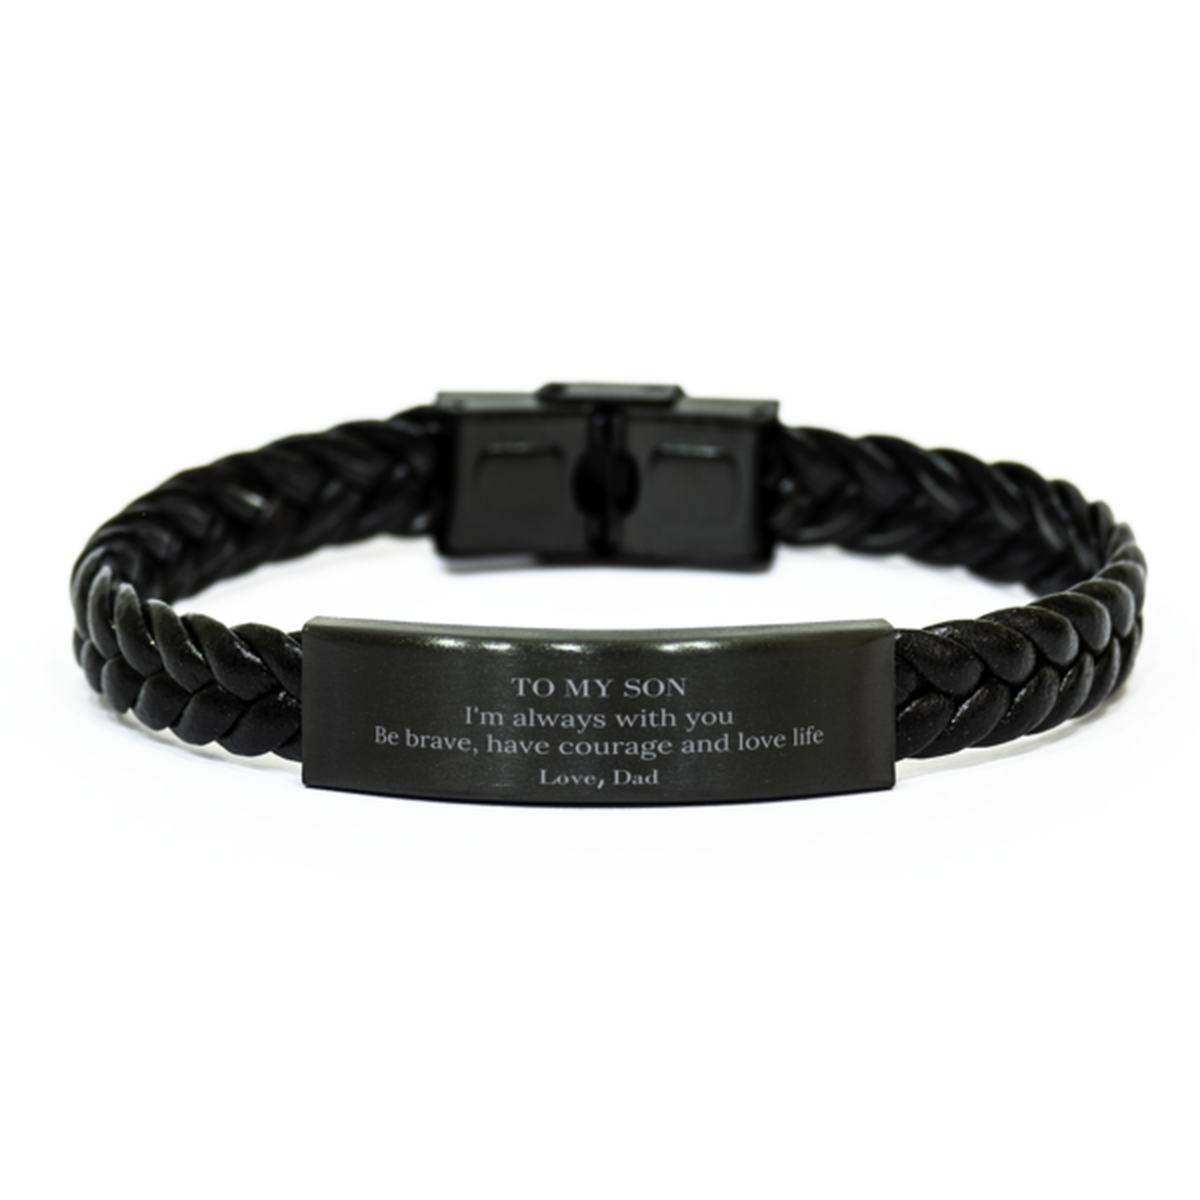 To My Son Gifts from Dad, Unique Braided Leather Bracelet Inspirational Christmas Birthday Graduation Gifts for Son I'm always with you. Be brave, have courage and love life. Love, Dad